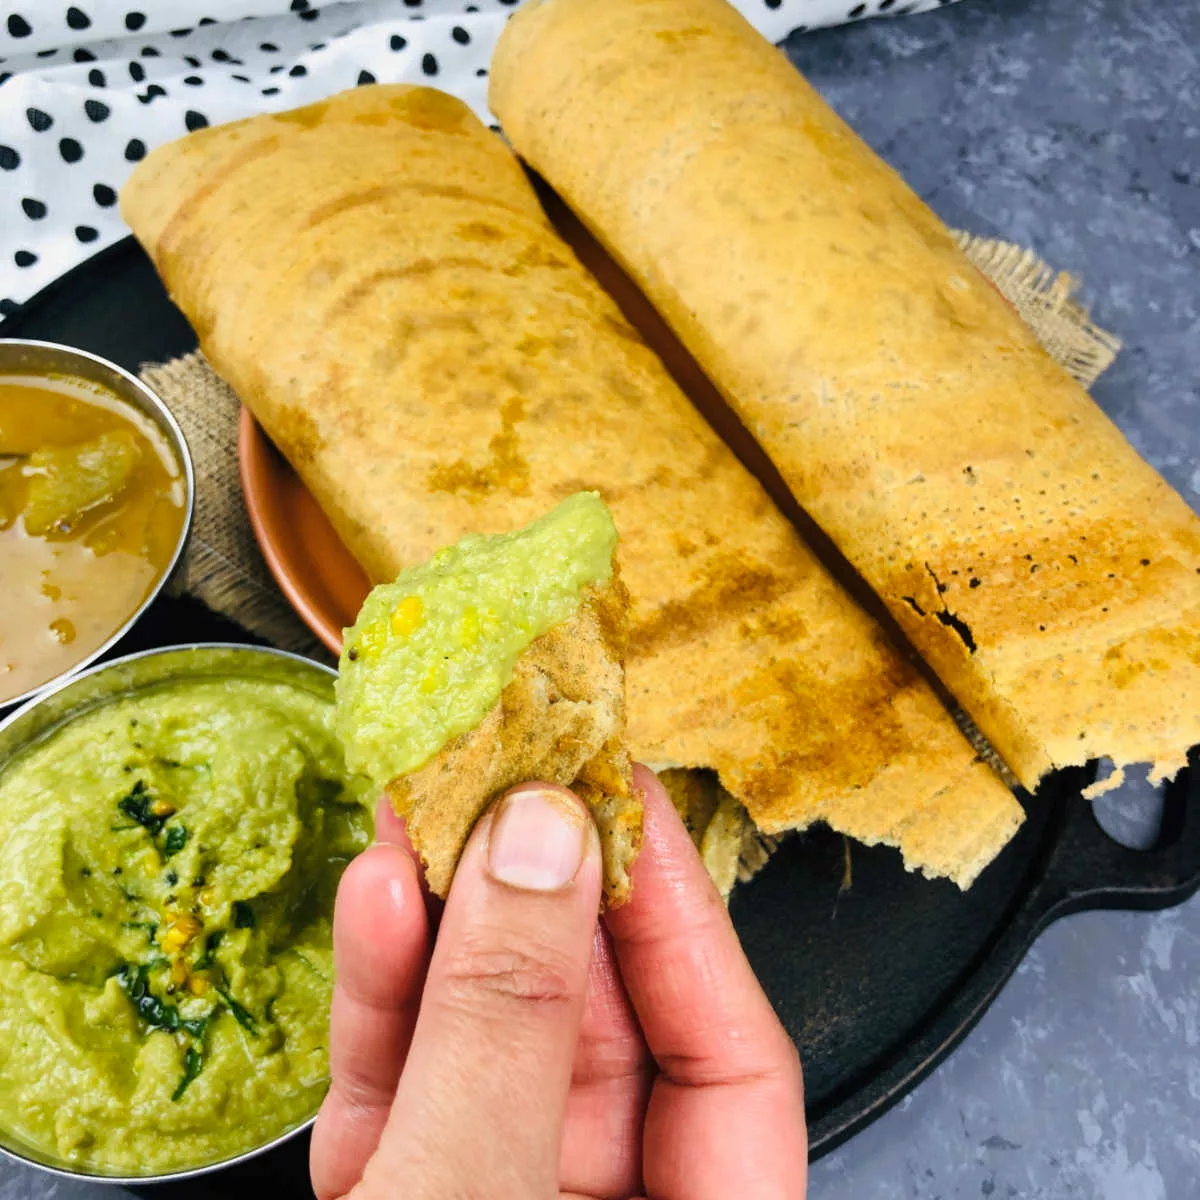 Piece of millet dosa dipped in chutney.